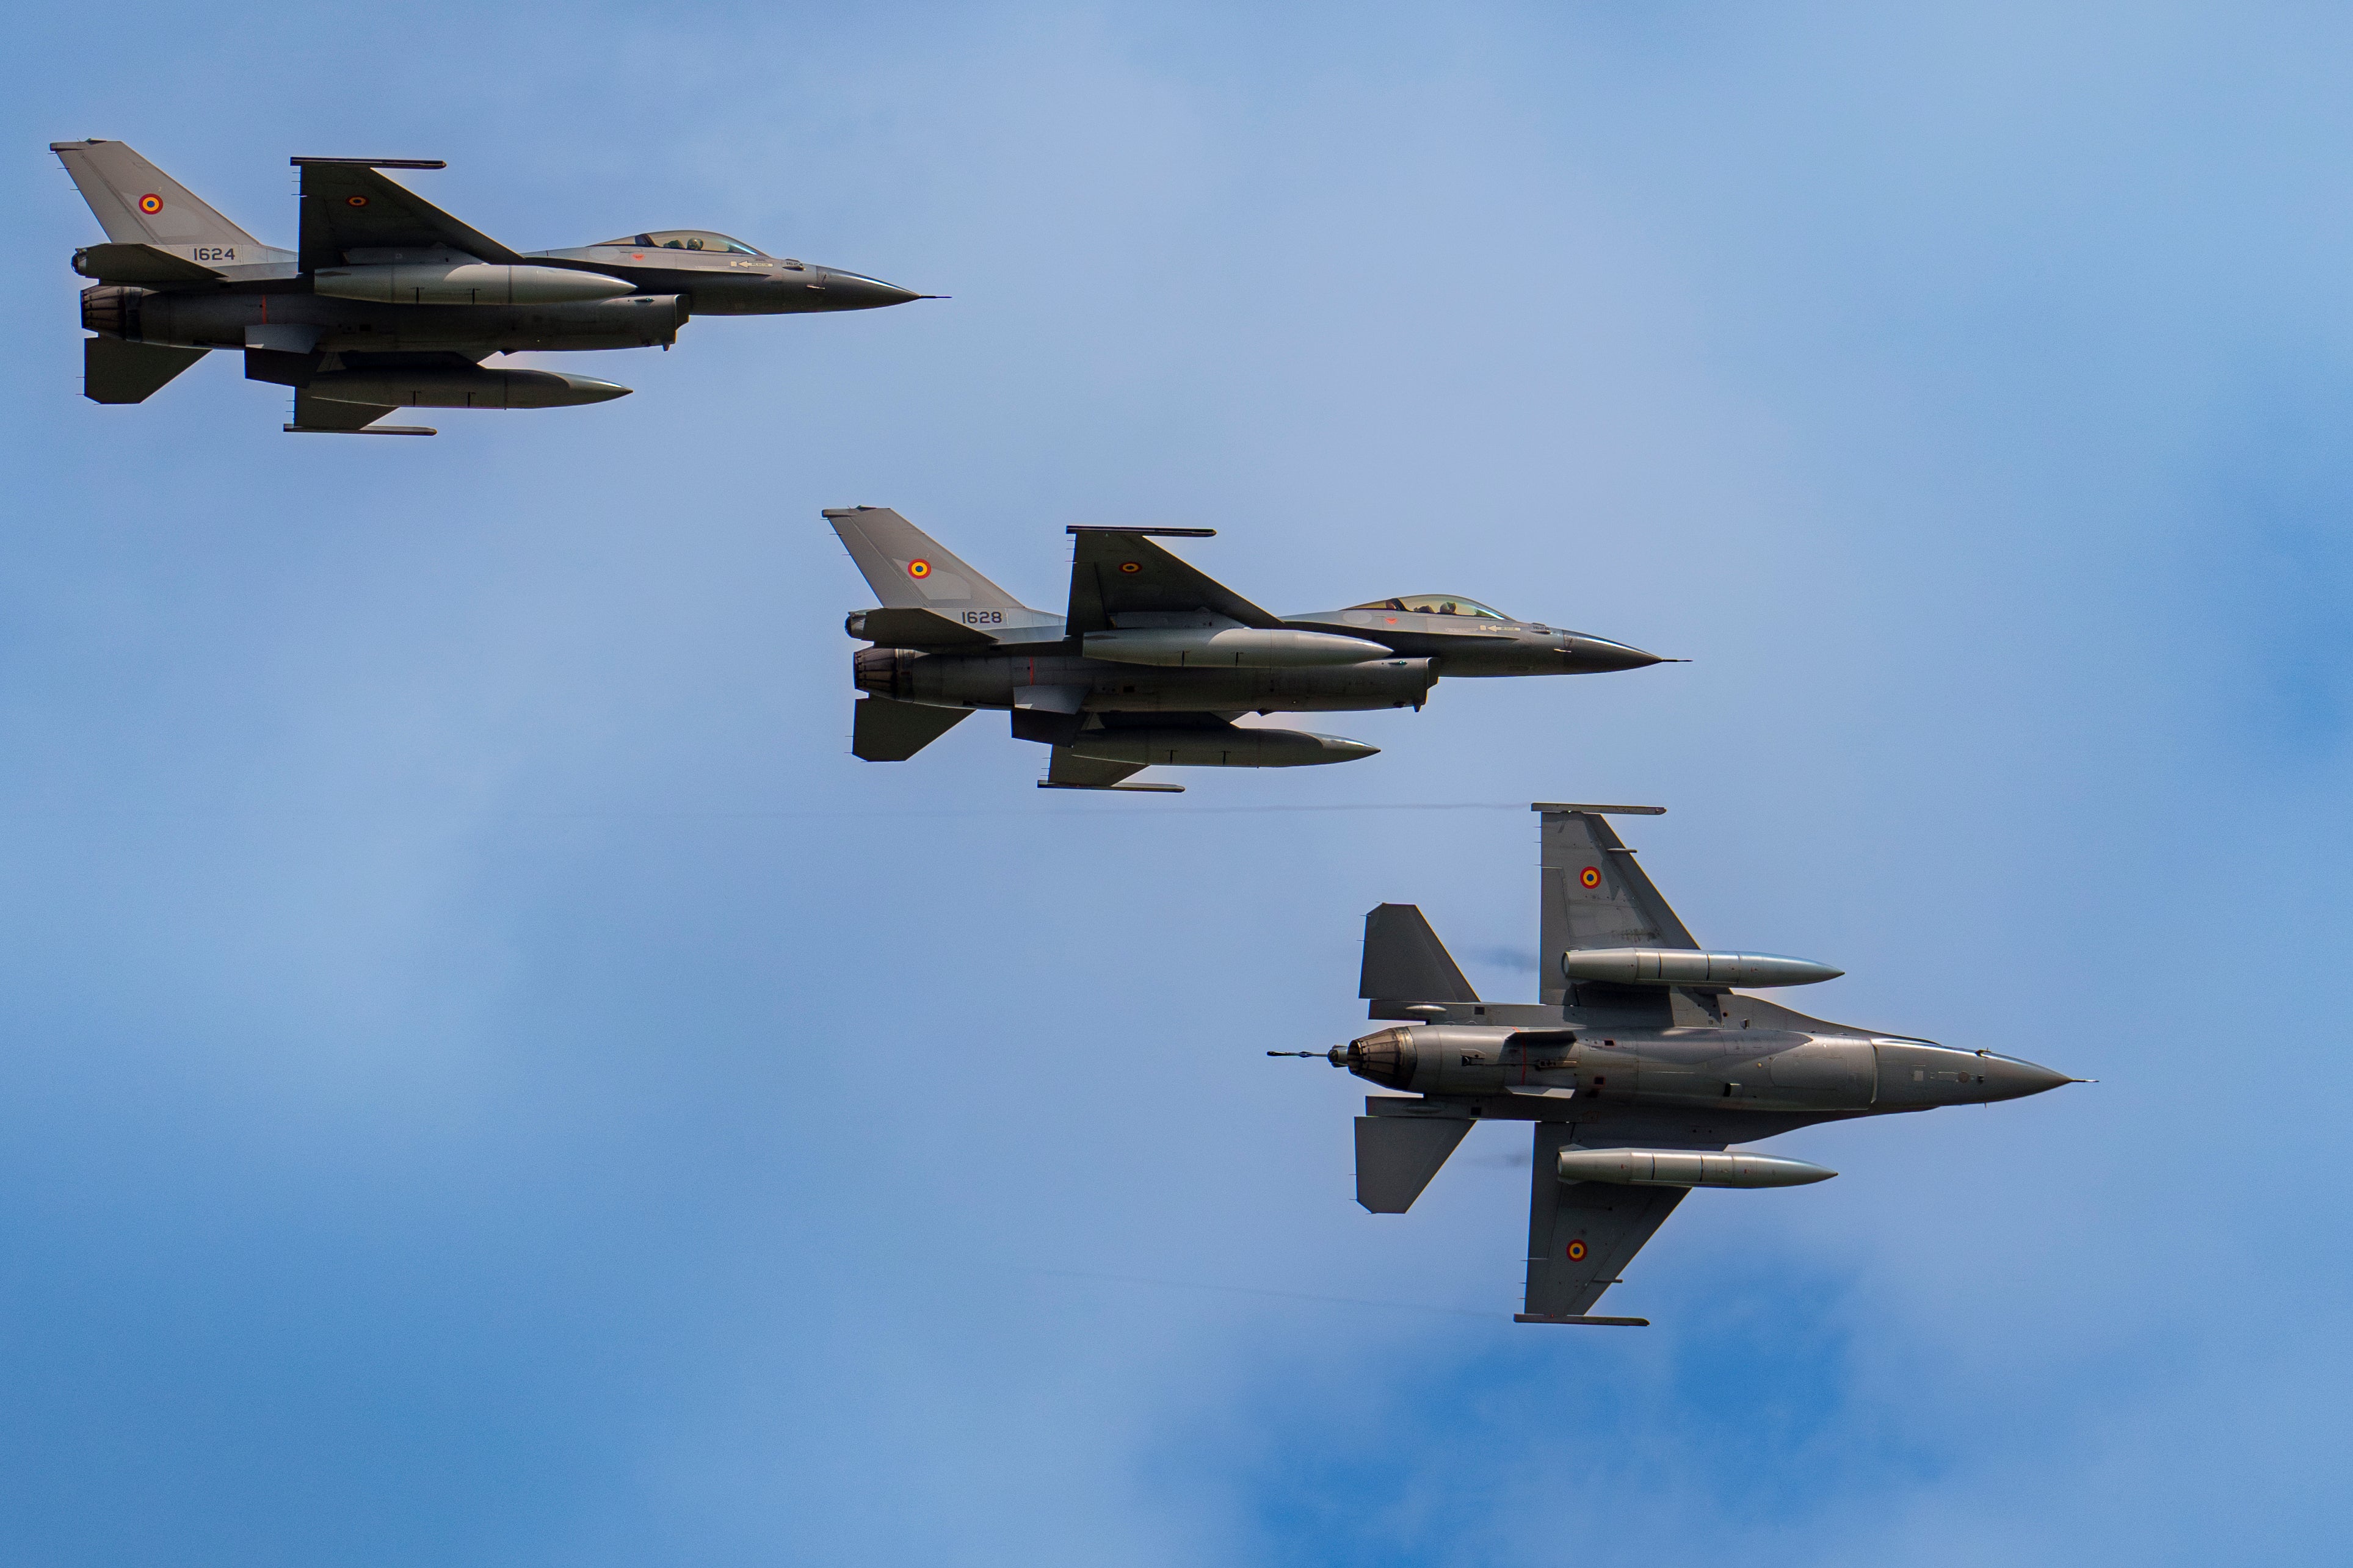 F-16 fighter jets of the Romanian Air Force perform a fly by at the Black Sea, Defense, Aerospace and Security (BSDA) international exhibition in Bucharest